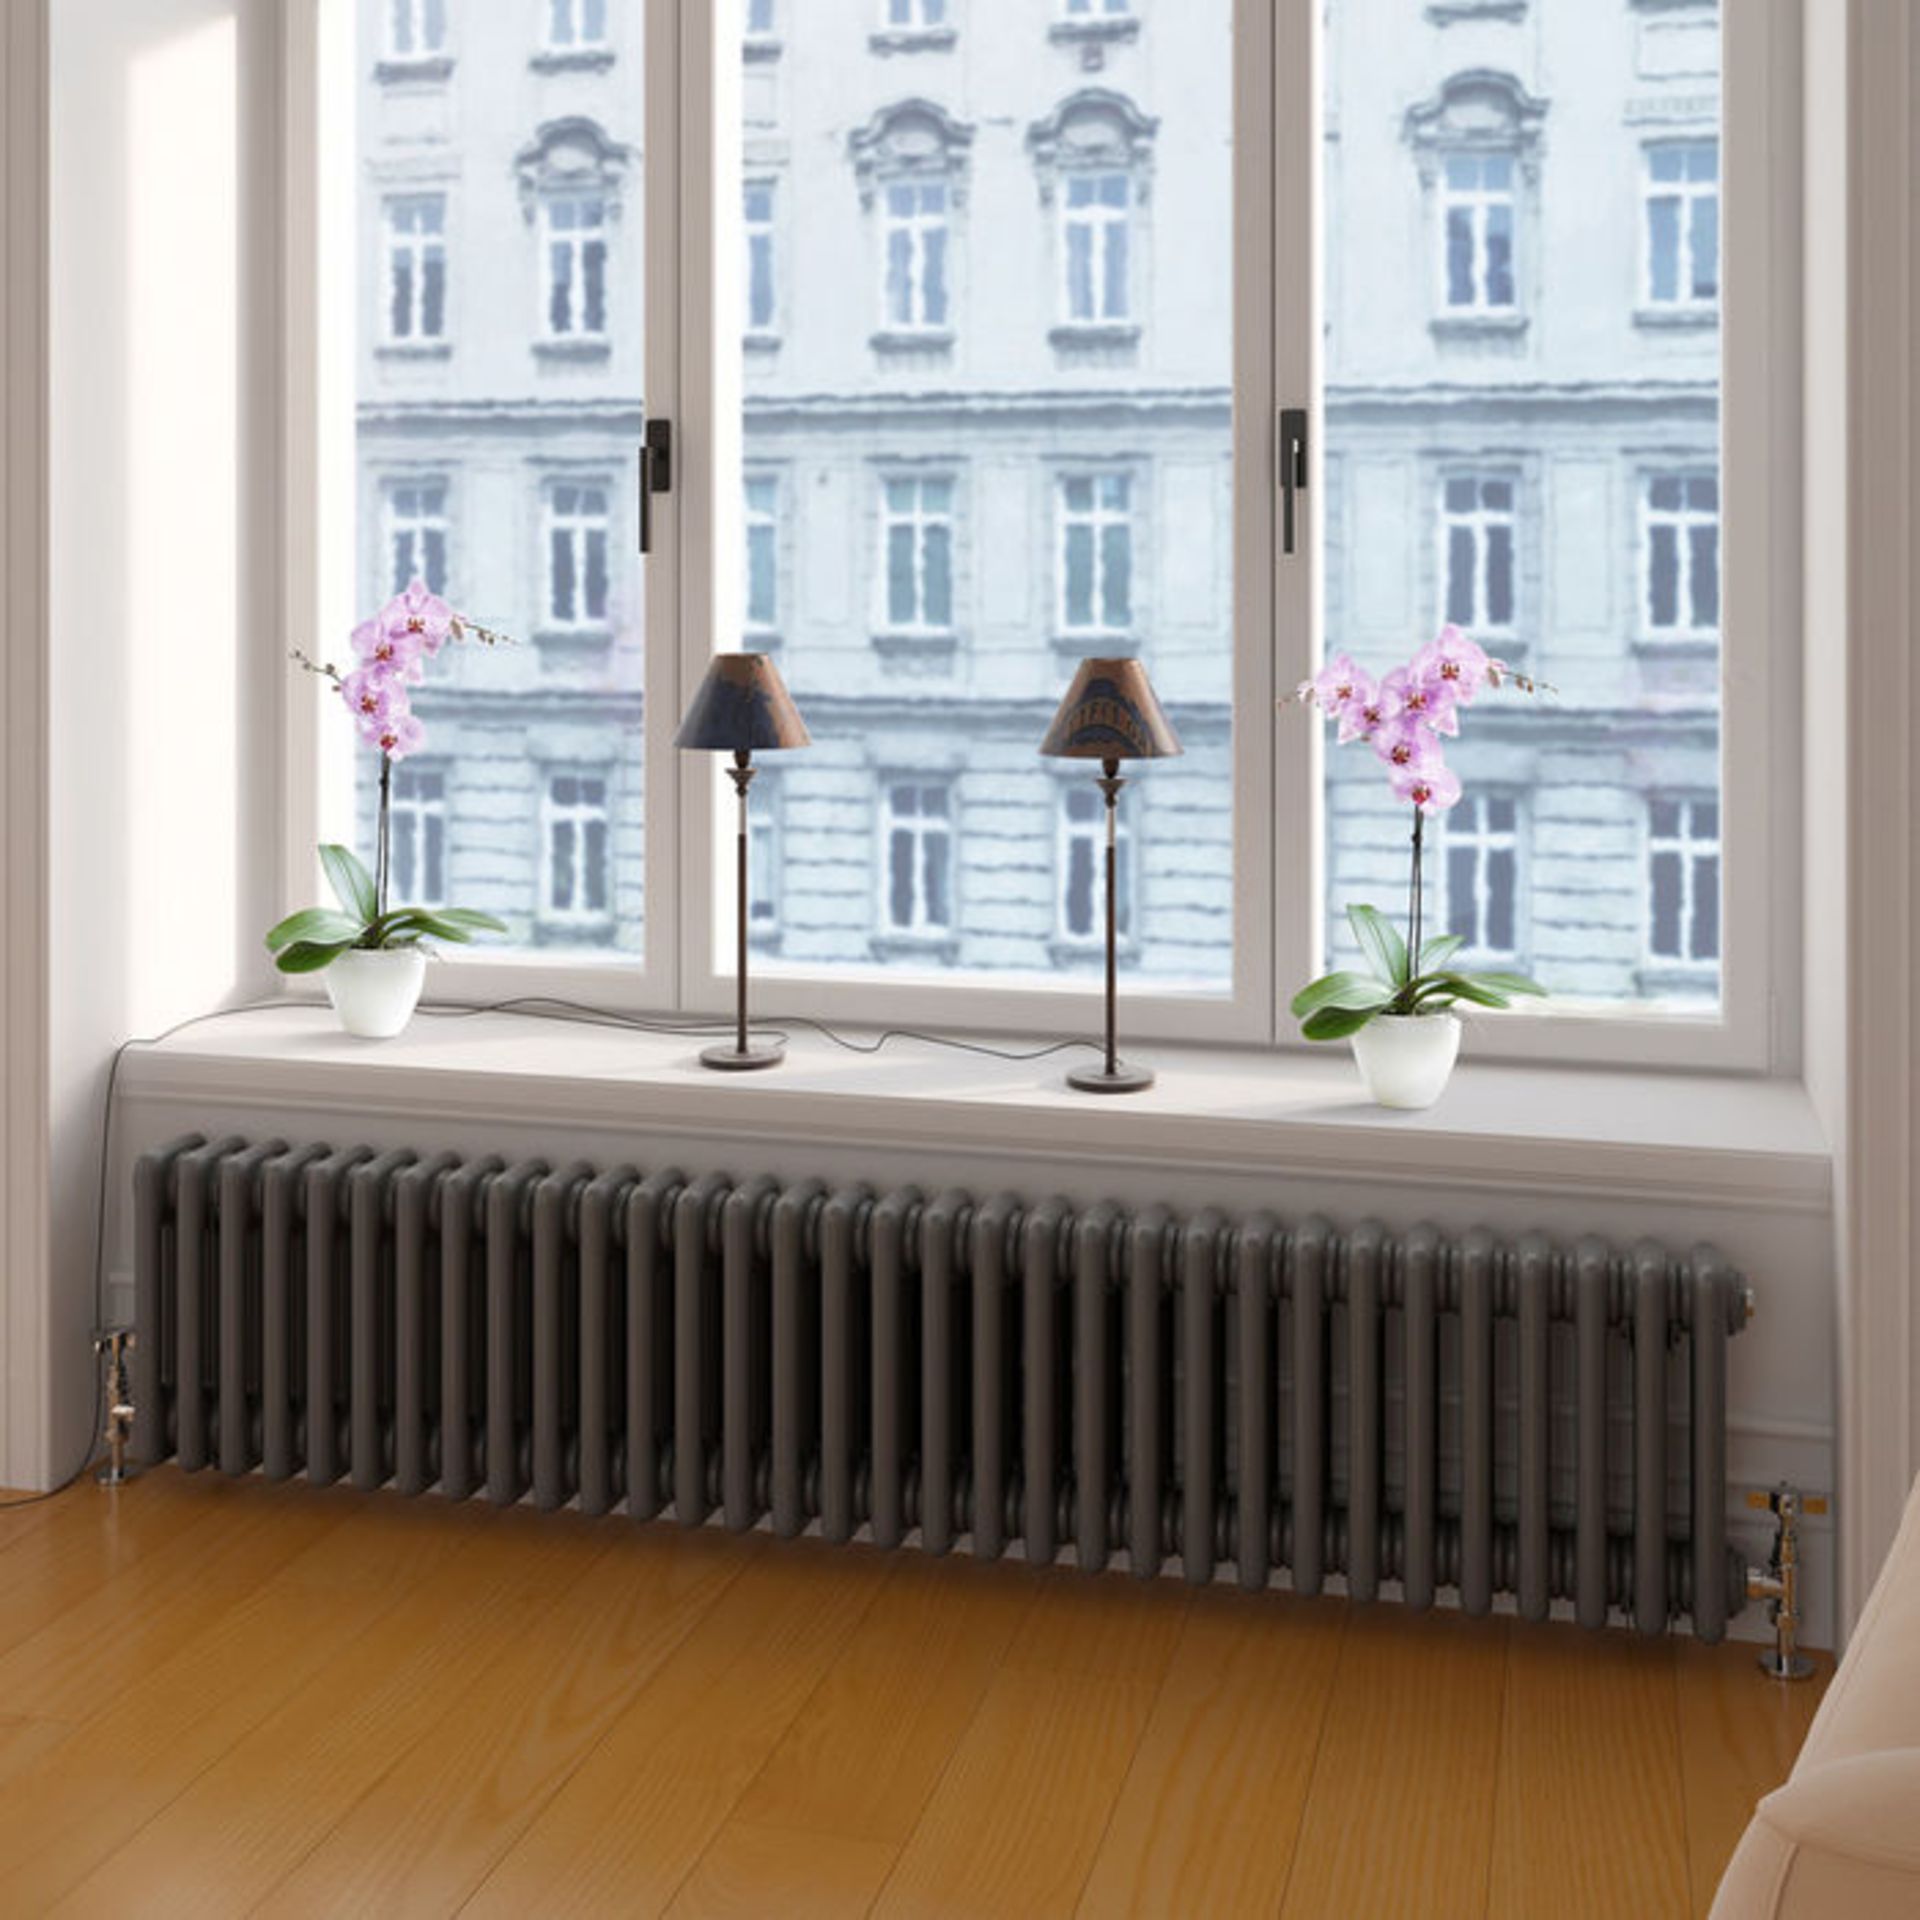 (W107) 300x1458mm Anthracite Triple Panel Horizontal Colosseum Traditional Radiator. RRP £649.99. - Image 2 of 5